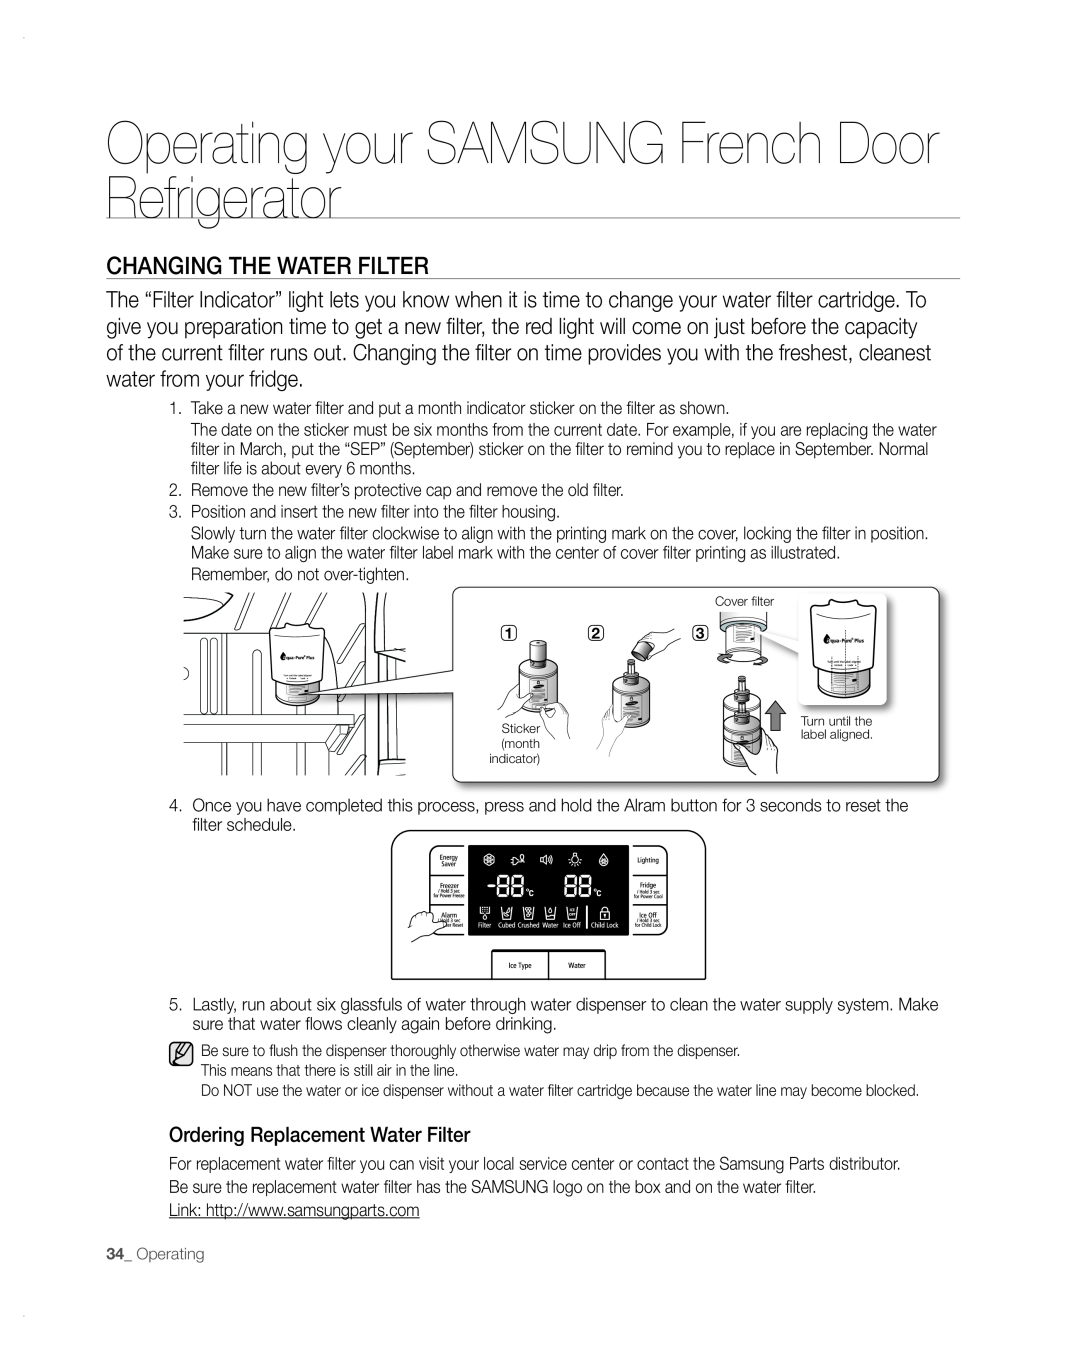 Samsung RFG297AA user manual CHAnGinG tHE wAtER FiLtER, Operating your SAMSUNG French Door Refrigerator 